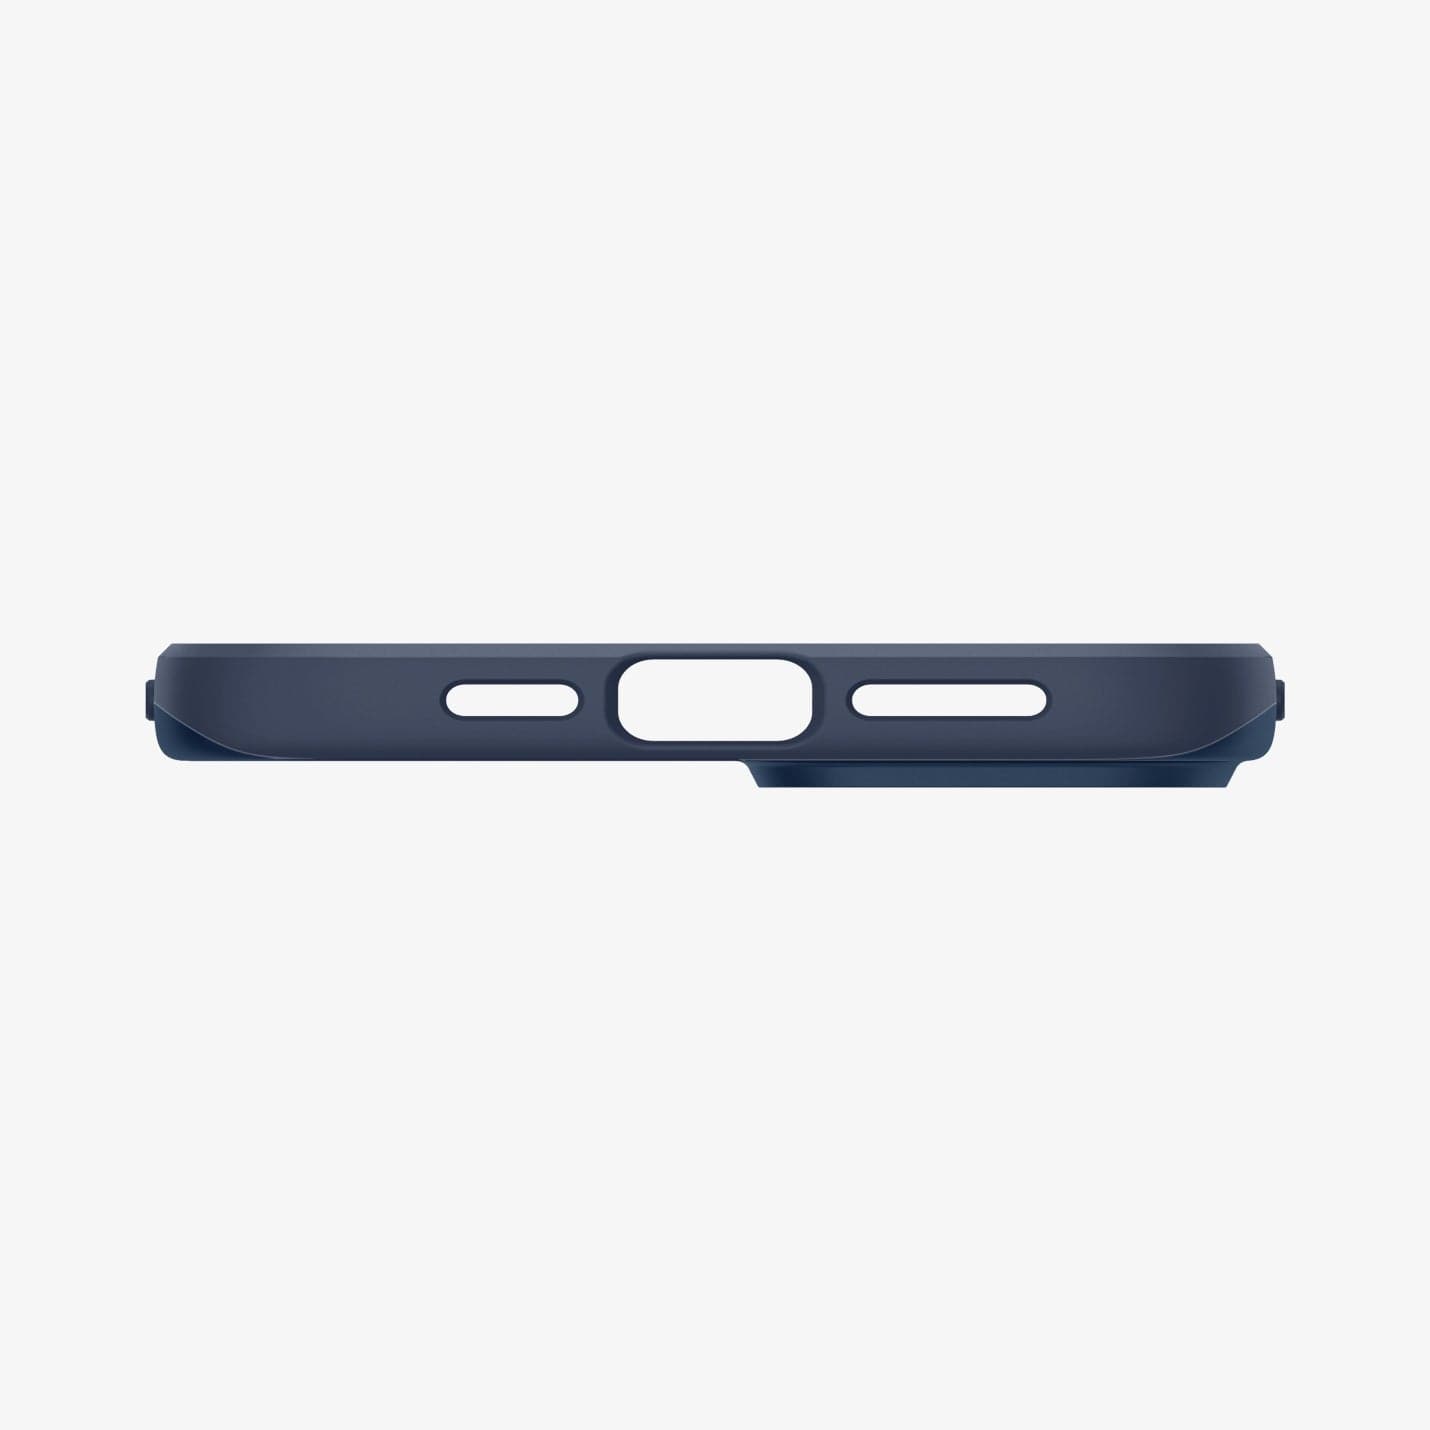 ACS04775 - iPhone 14 Plus Case Thin Fit in navy blue showing the bottom with precise cutouts